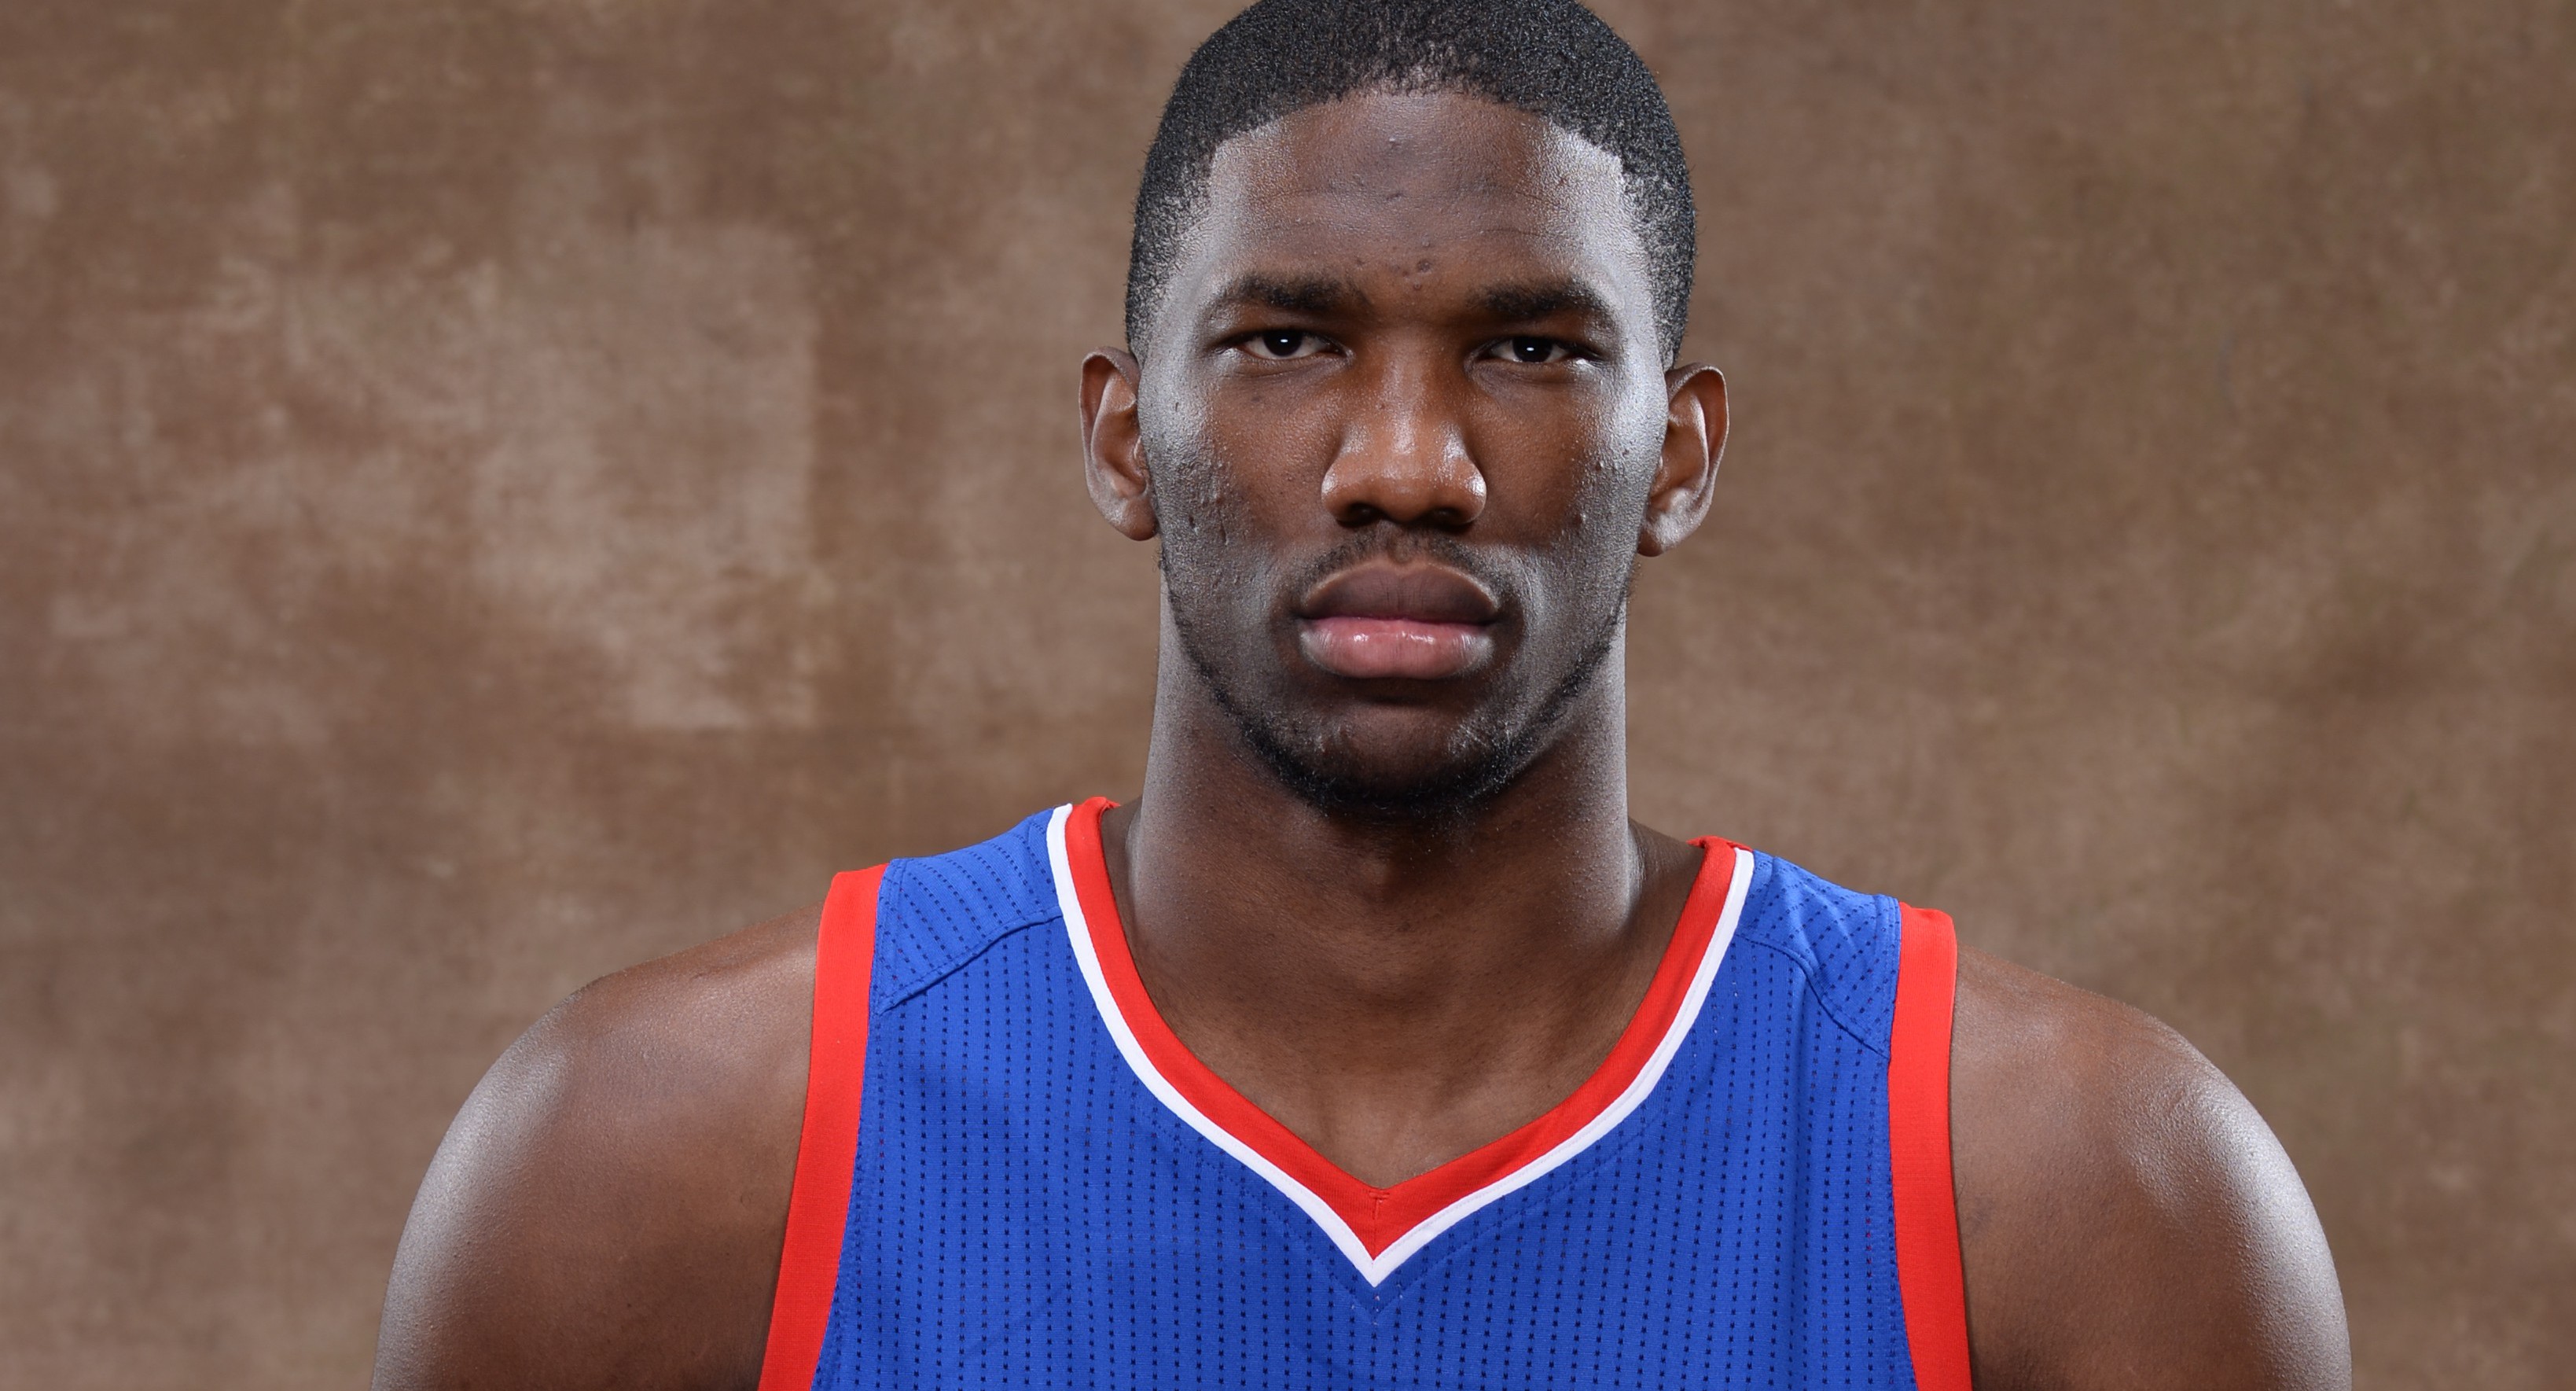 TARRYTOWN, NY - AUGUST 3:  Joel Embiid #11 of the Philadelphia 76ers poses for a portrait during the 2014 NBA rookie photo shoot on August 3, 2014 at the Madison Square Garden Training Facility in Tarrytown, New York. NOTE TO USER: User expressly acknowledges and agrees that, by downloading and or using this photograph, User is consenting to the terms and conditions of the Getty Images License Agreement. Mandatory Copyright Notice: Copyright 2014 NBAE (Photo by Jennifer Pottheiser /NBAE via Getty Images)